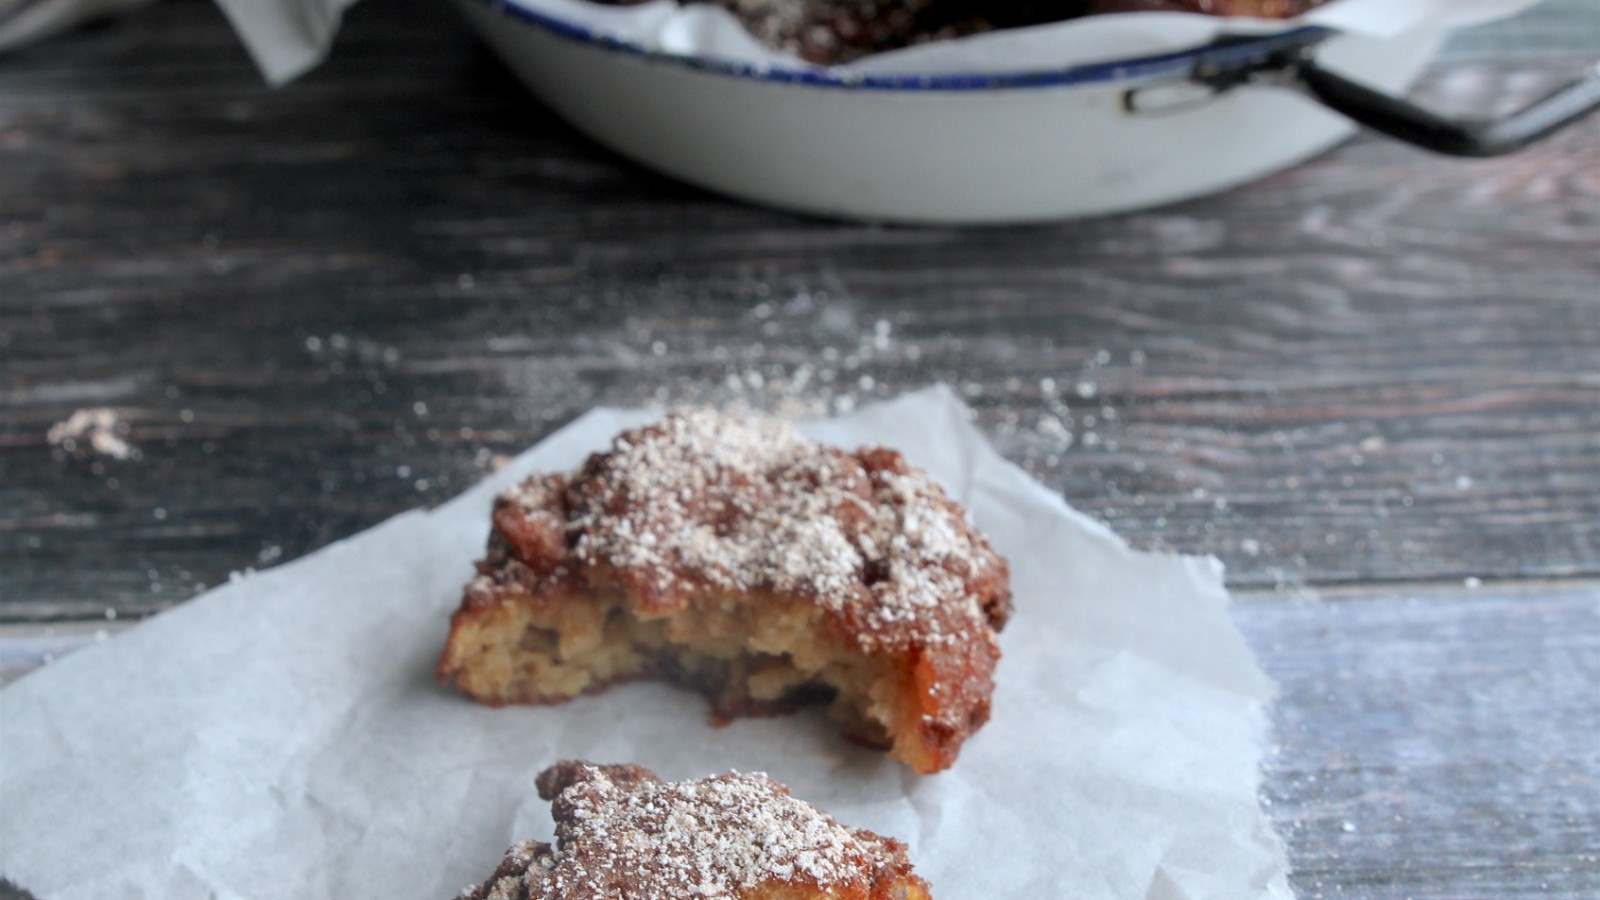 Image of Apple Fritters